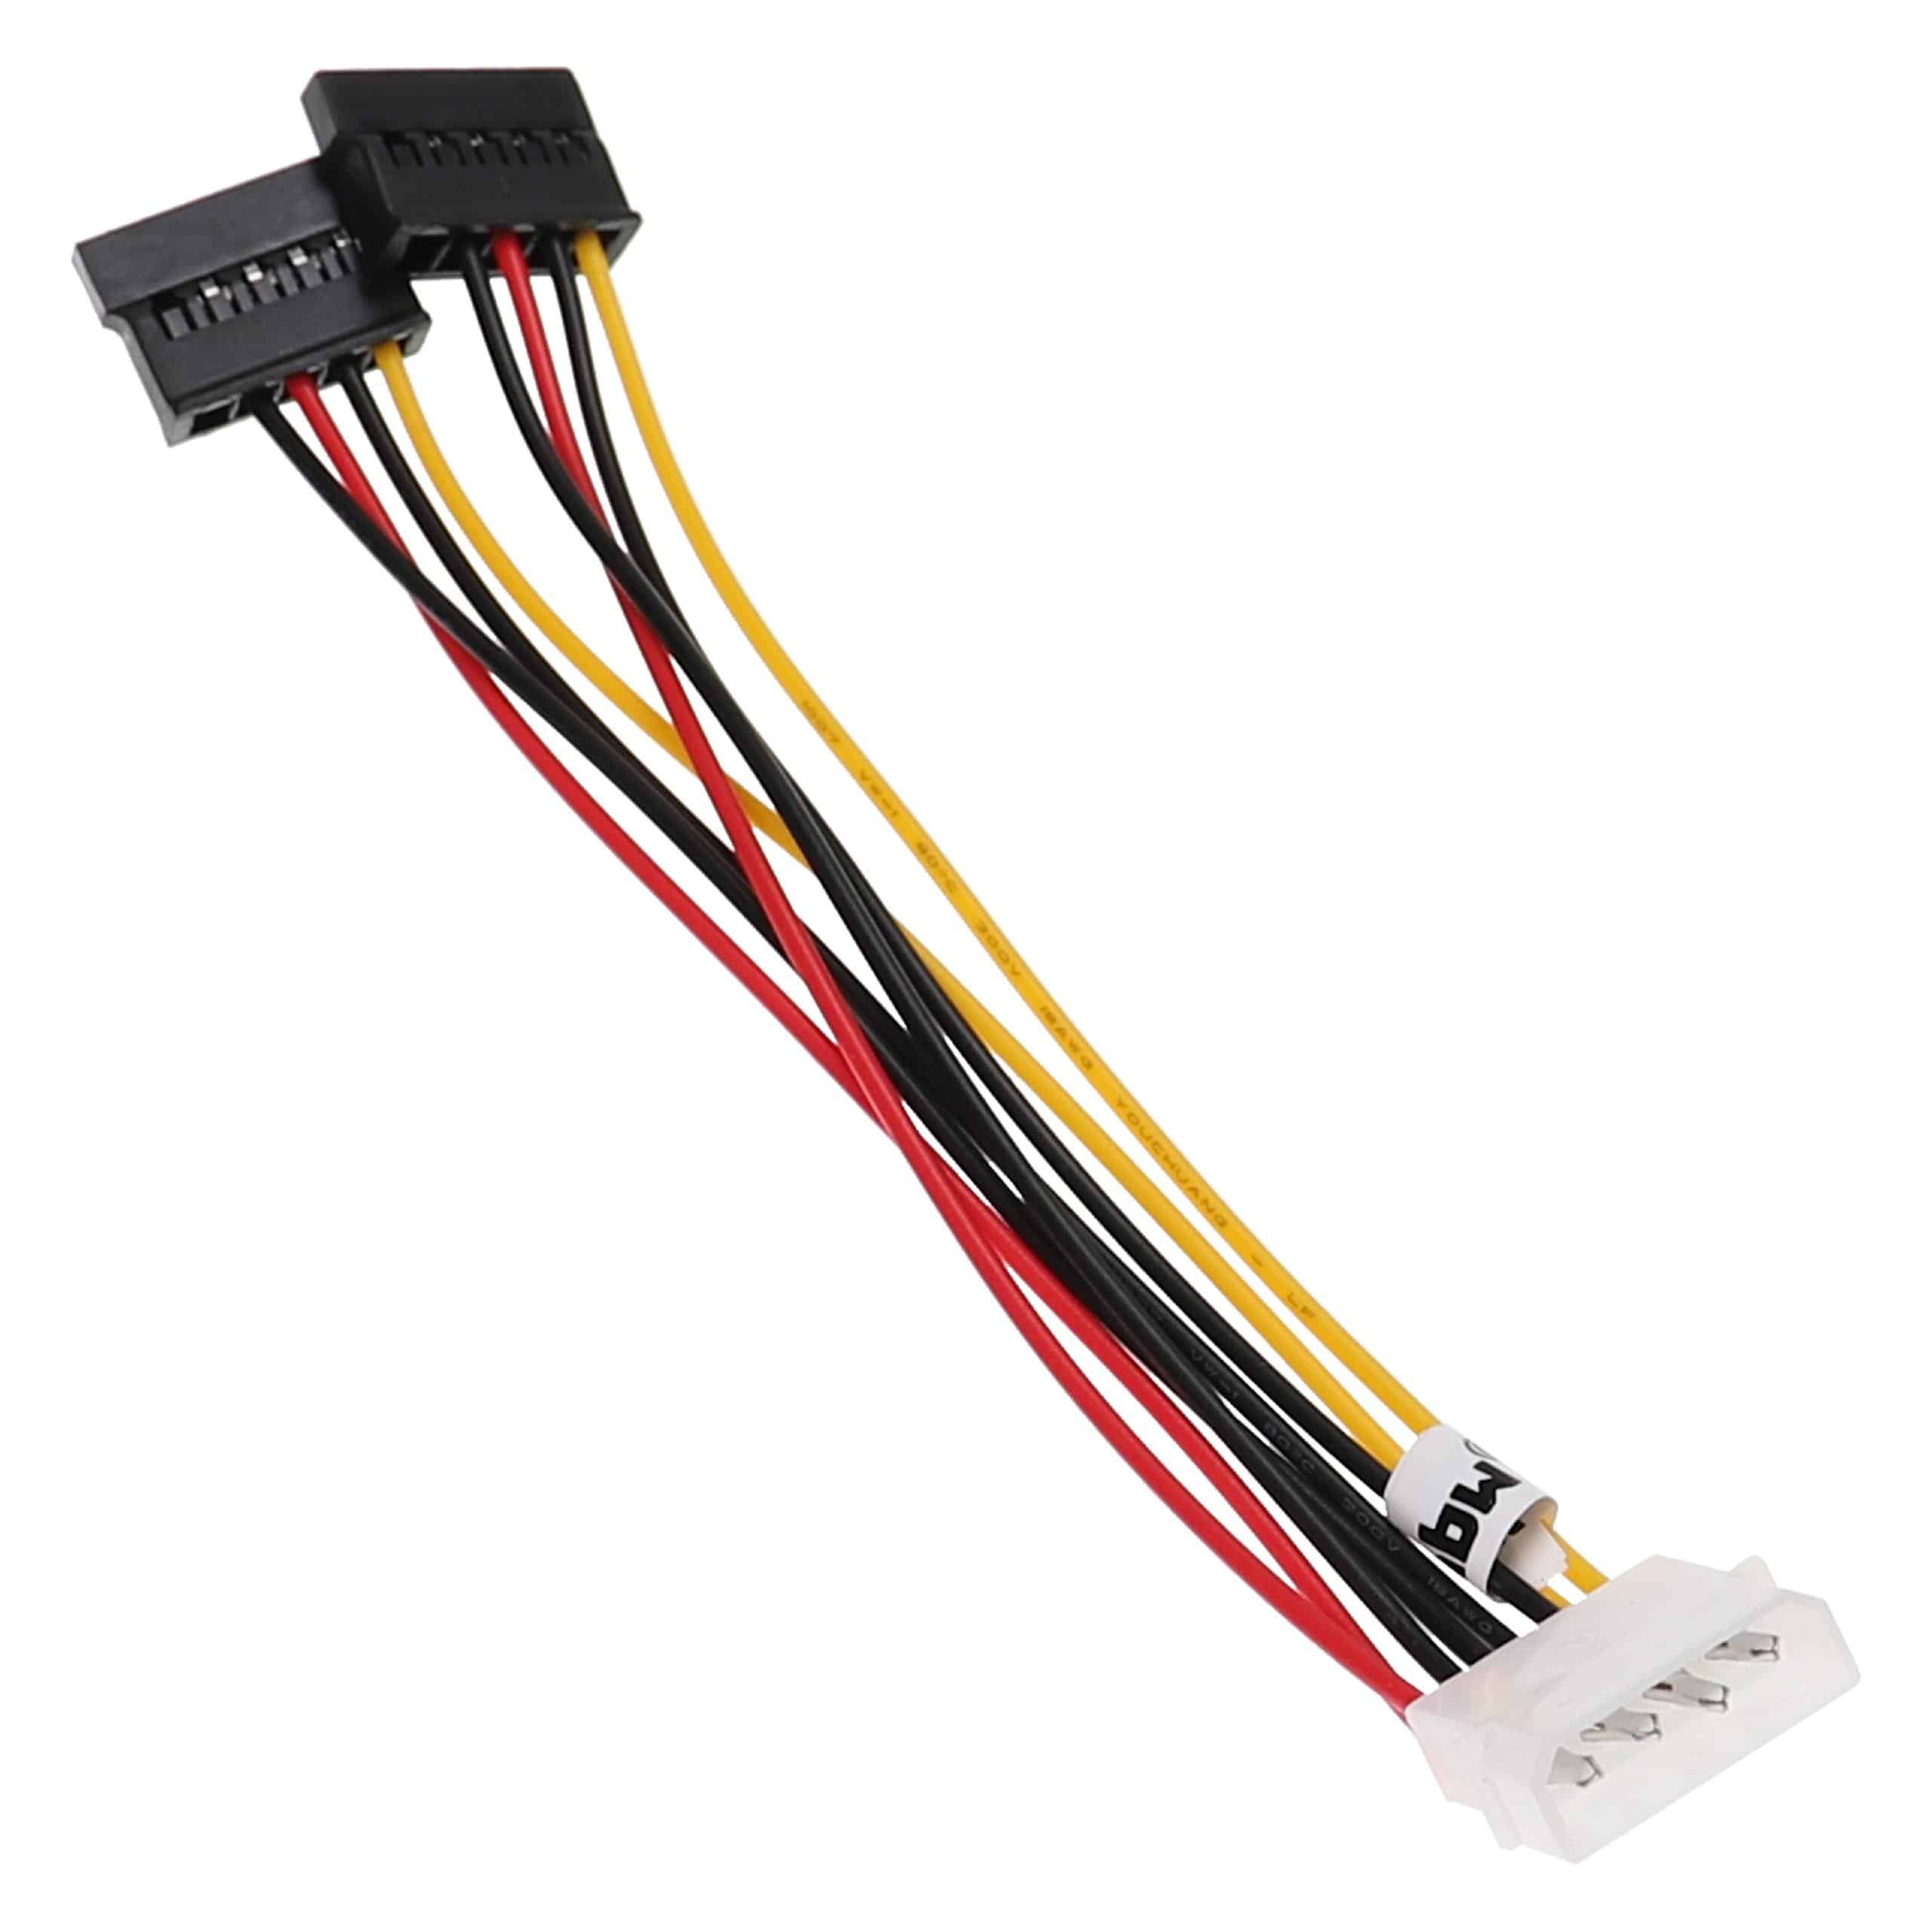 Power Cable to 2x SATA socket suitable for Hard Drives - Y Power Cable, 12 cm